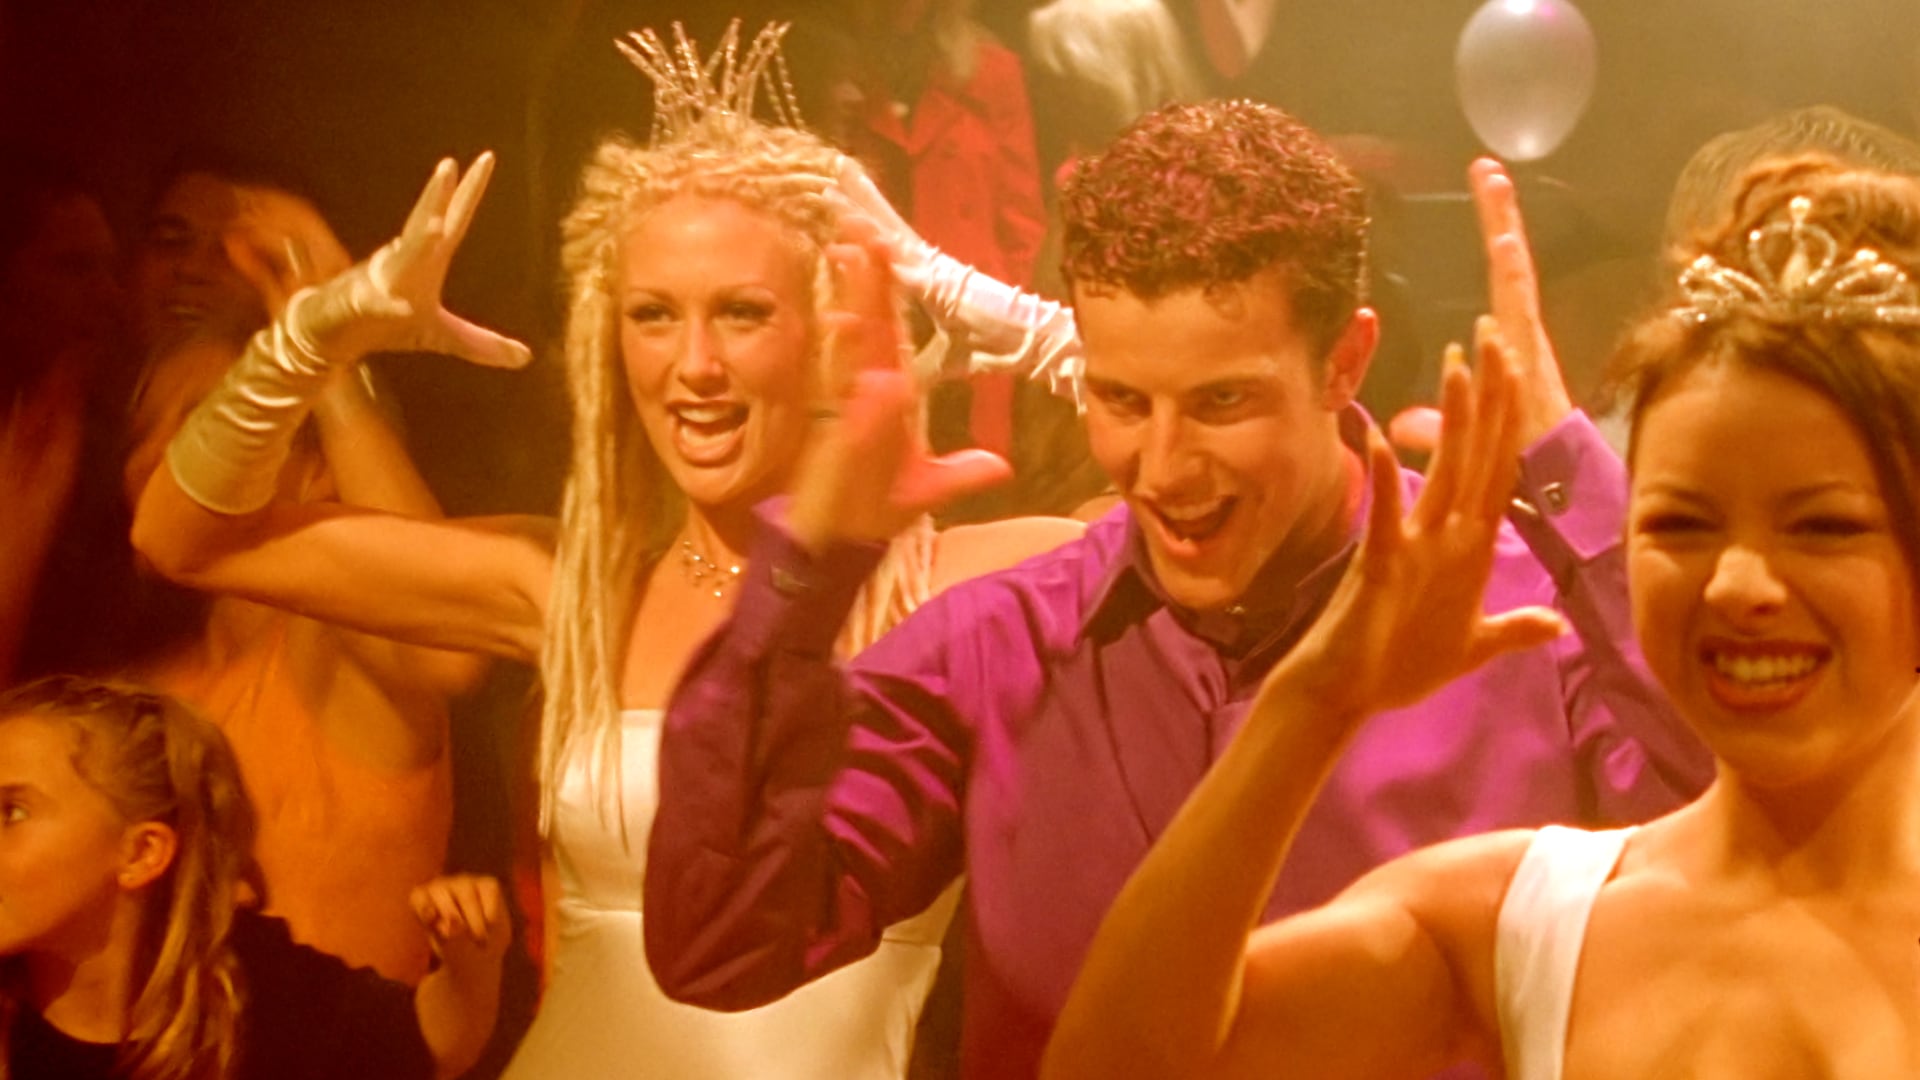 Faye Tozer, Lee Latchford Evans and Lisa Scott-Lee performing in 'Tragedy'. Pic: Sony Music